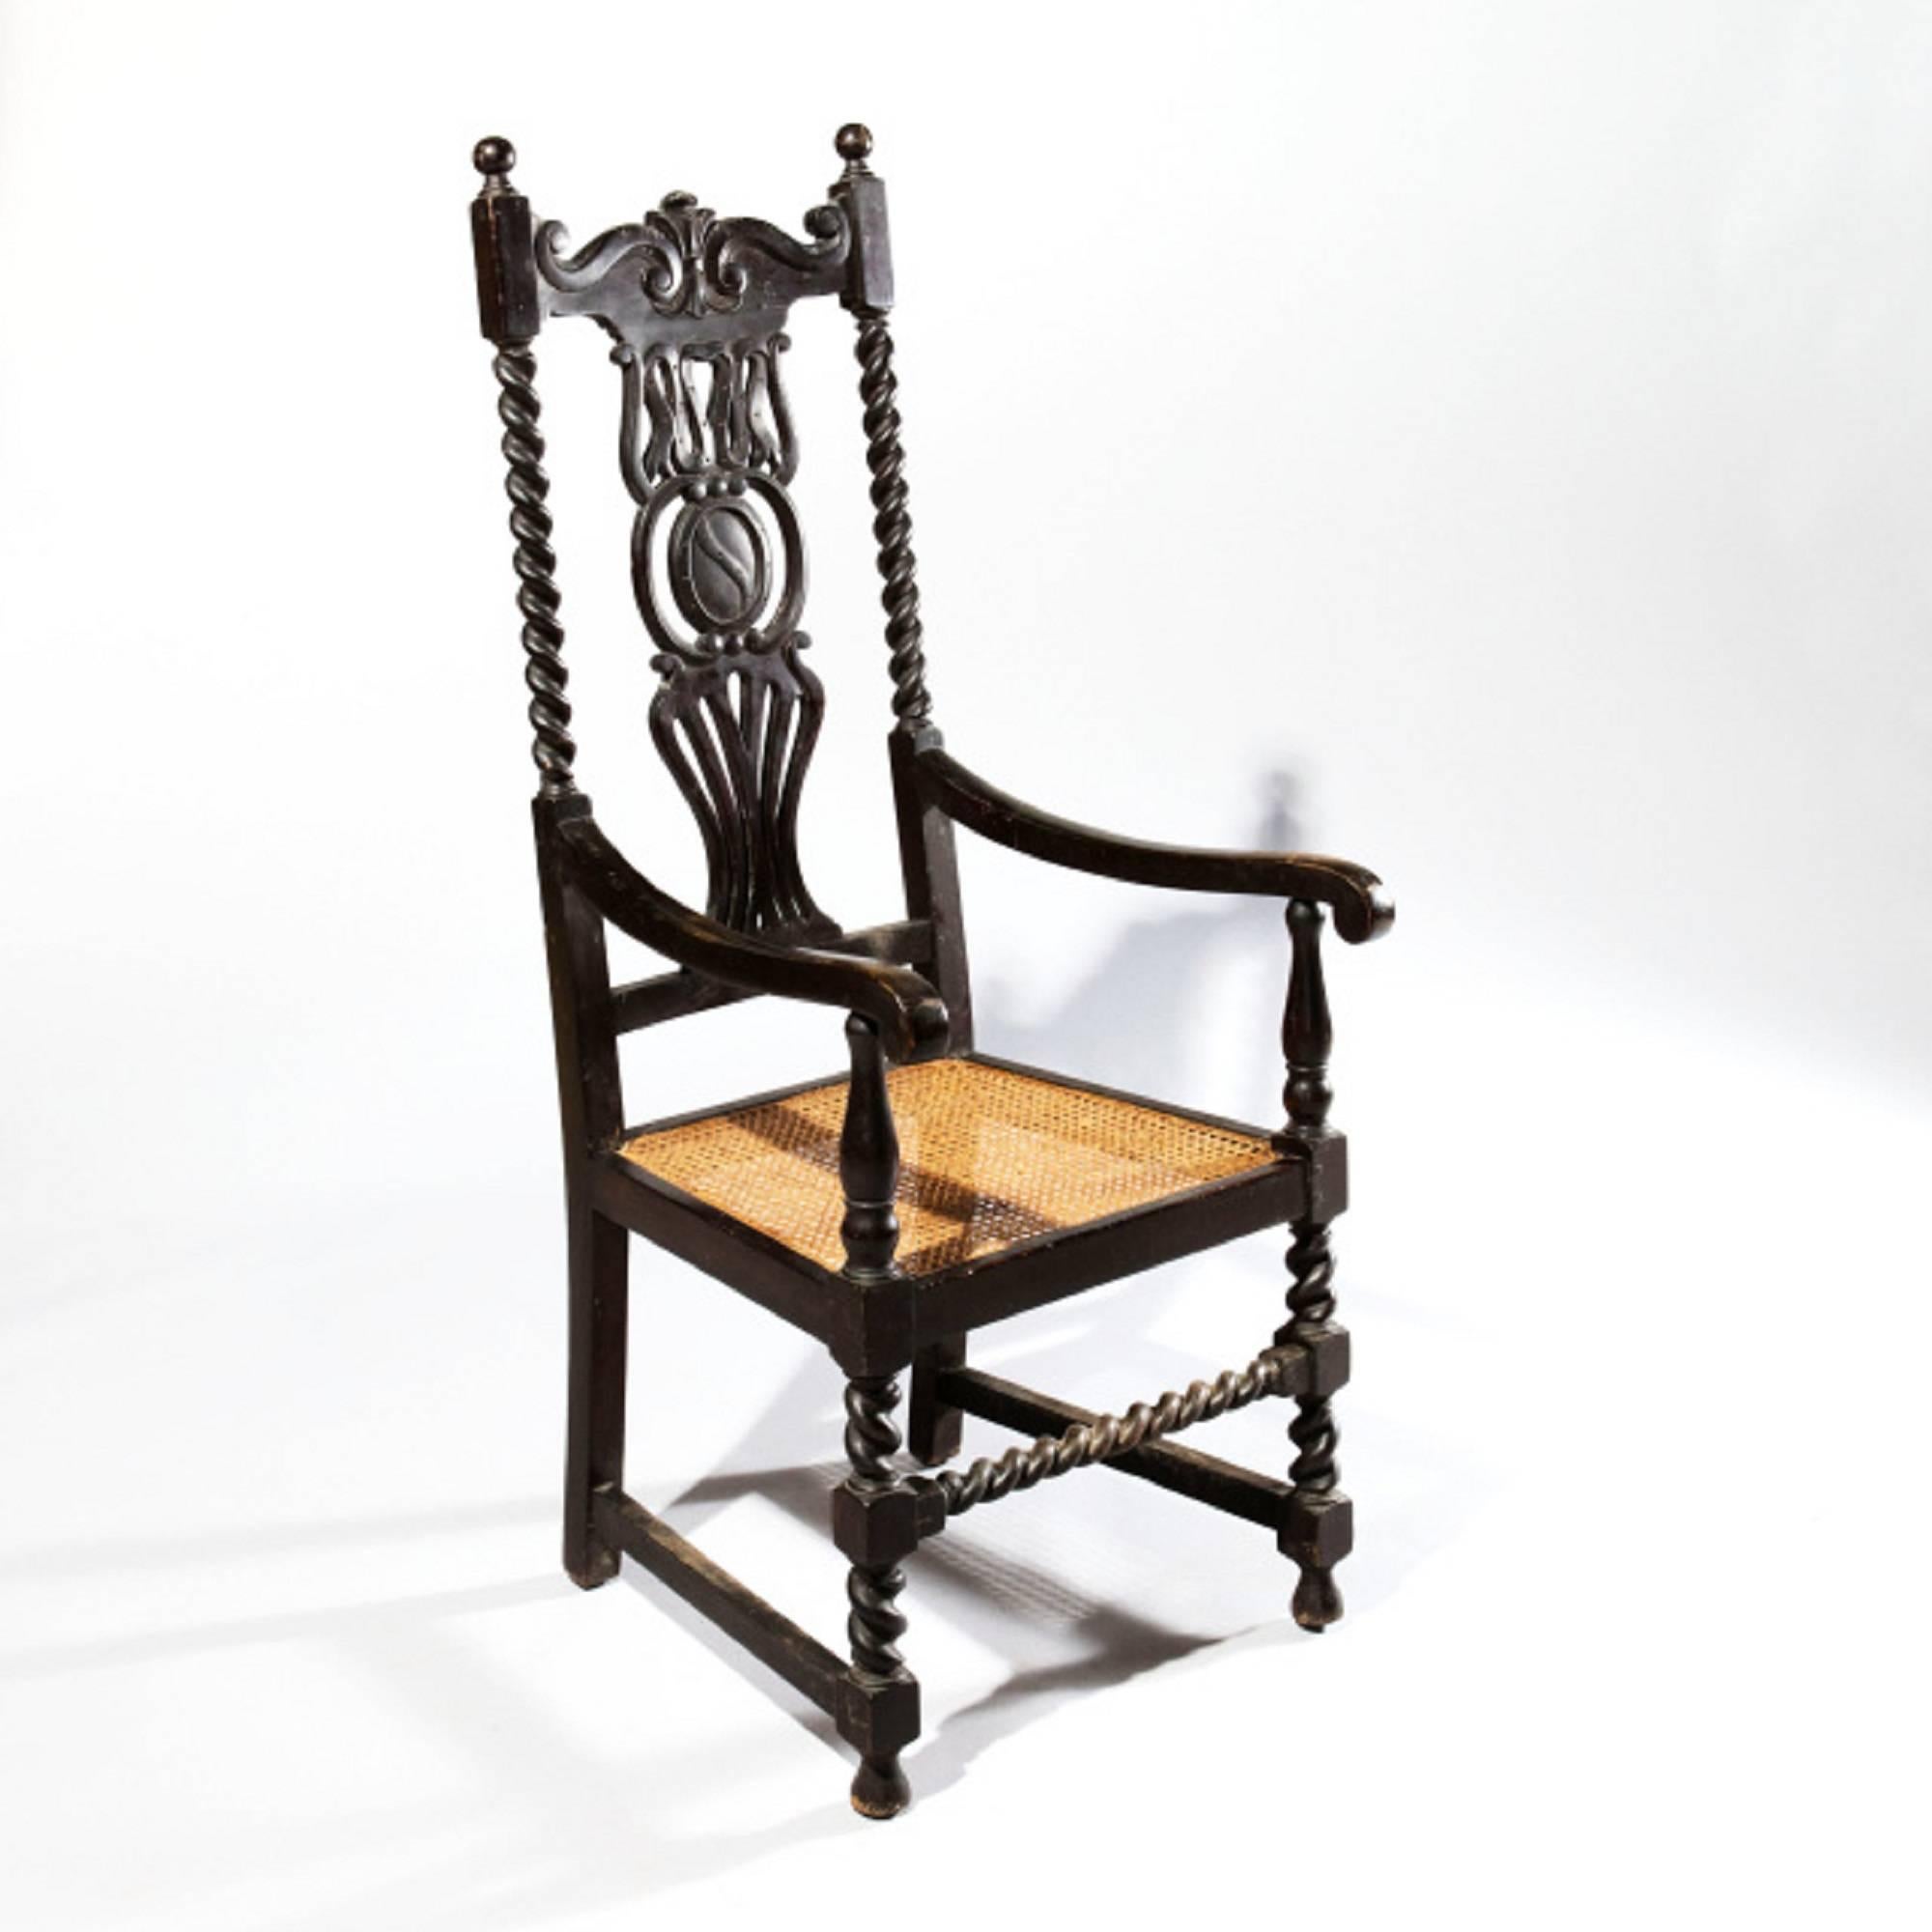 An unusual high back chair, the ebonised wooden frame with spiral supports and unusual pierced splat, the swept arms above baluster supports, cane seats and barely twist legs and front stretcher.